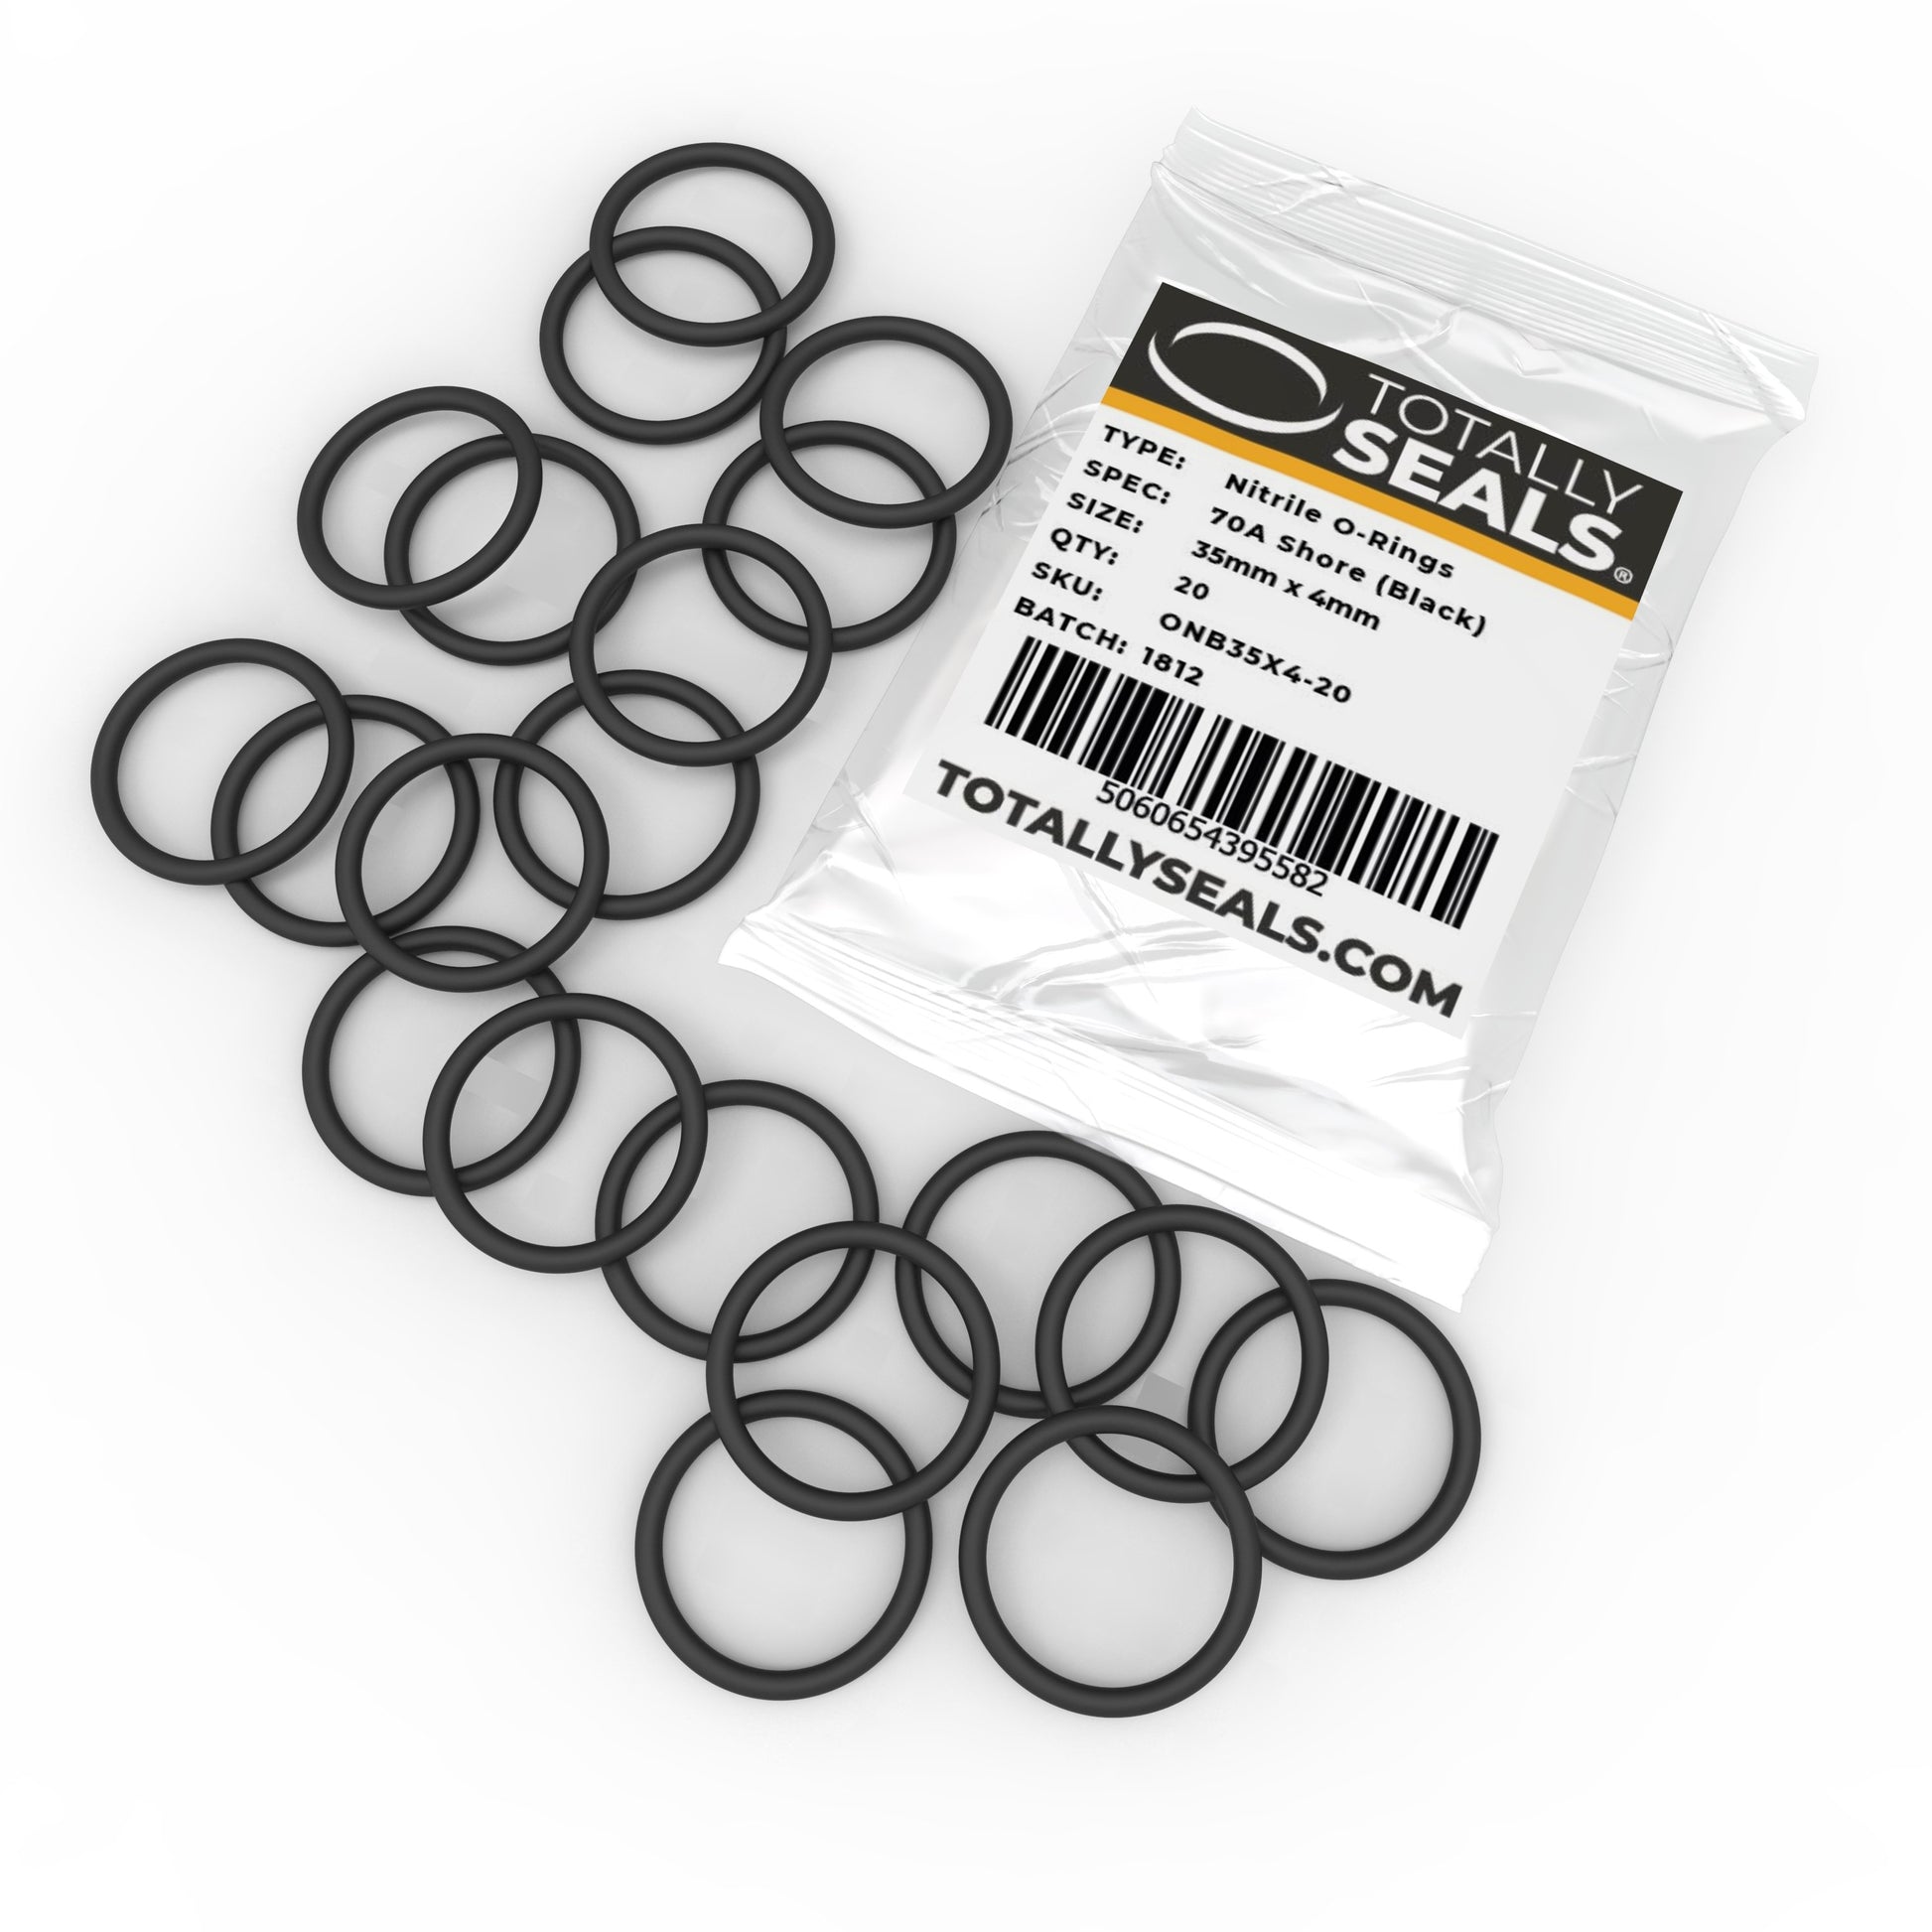 35mm x 4mm (43mm OD) Nitrile O-Rings - Totally Seals®